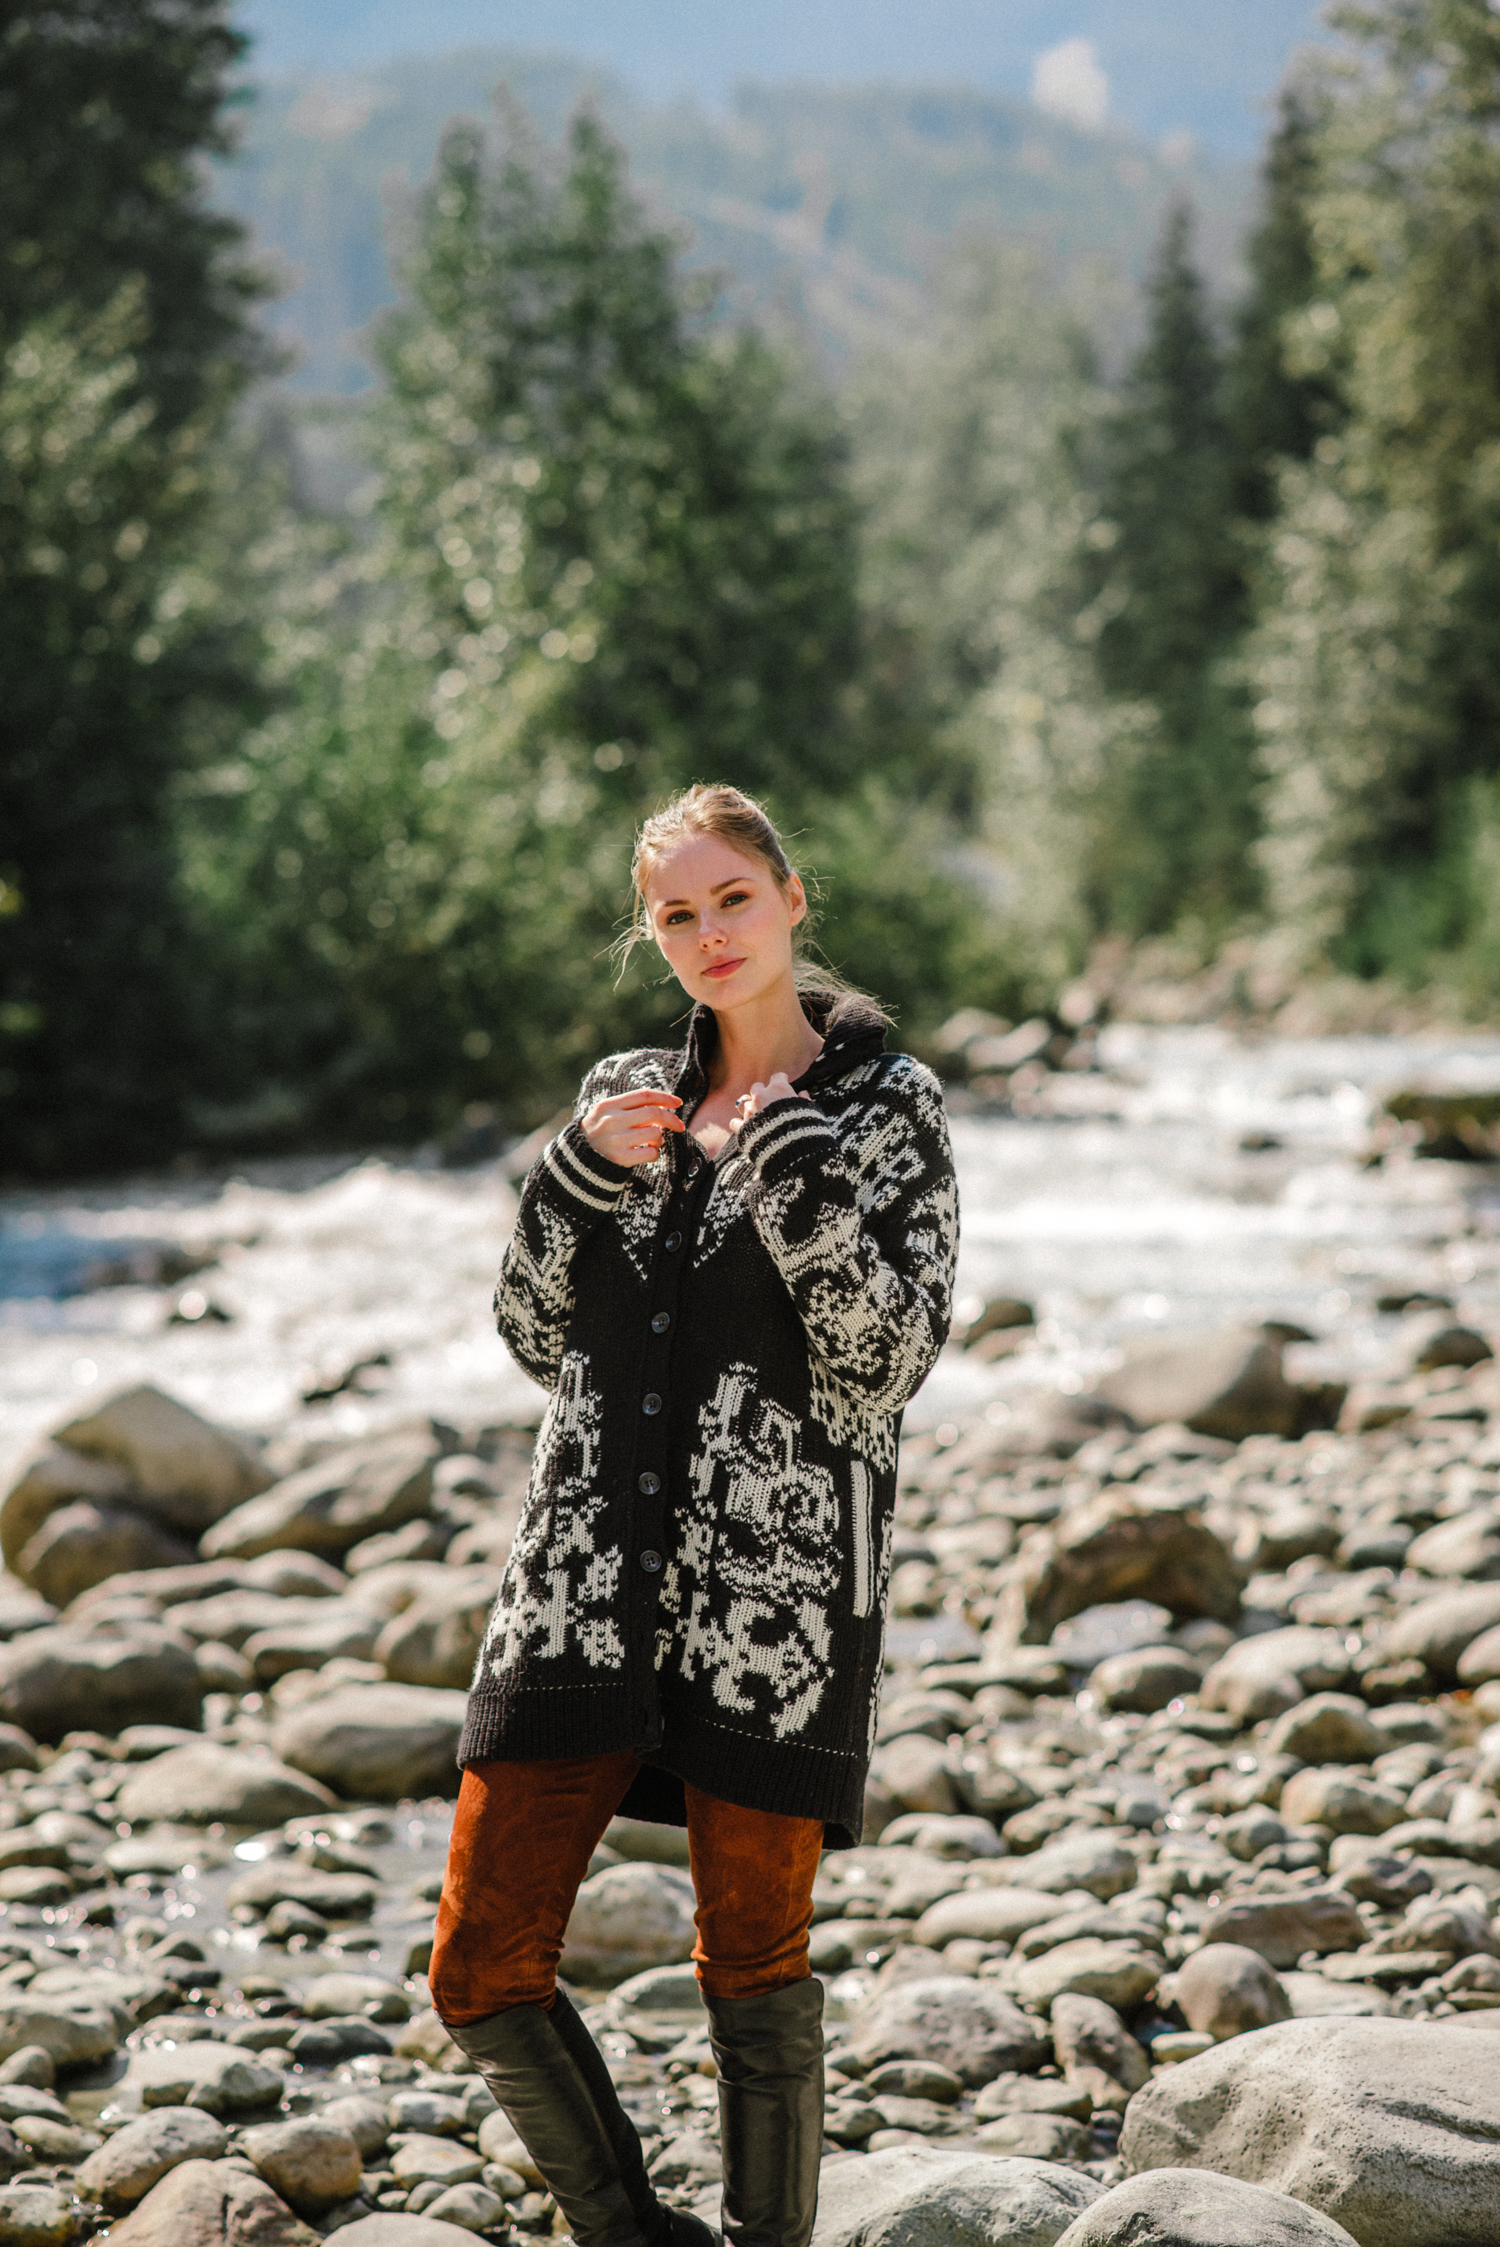 Alyssa Campanella of The A List shares her Whistler City Guide wearing RED Valentino Intarsia cardigan and Joseph Suede pants at Whistler village